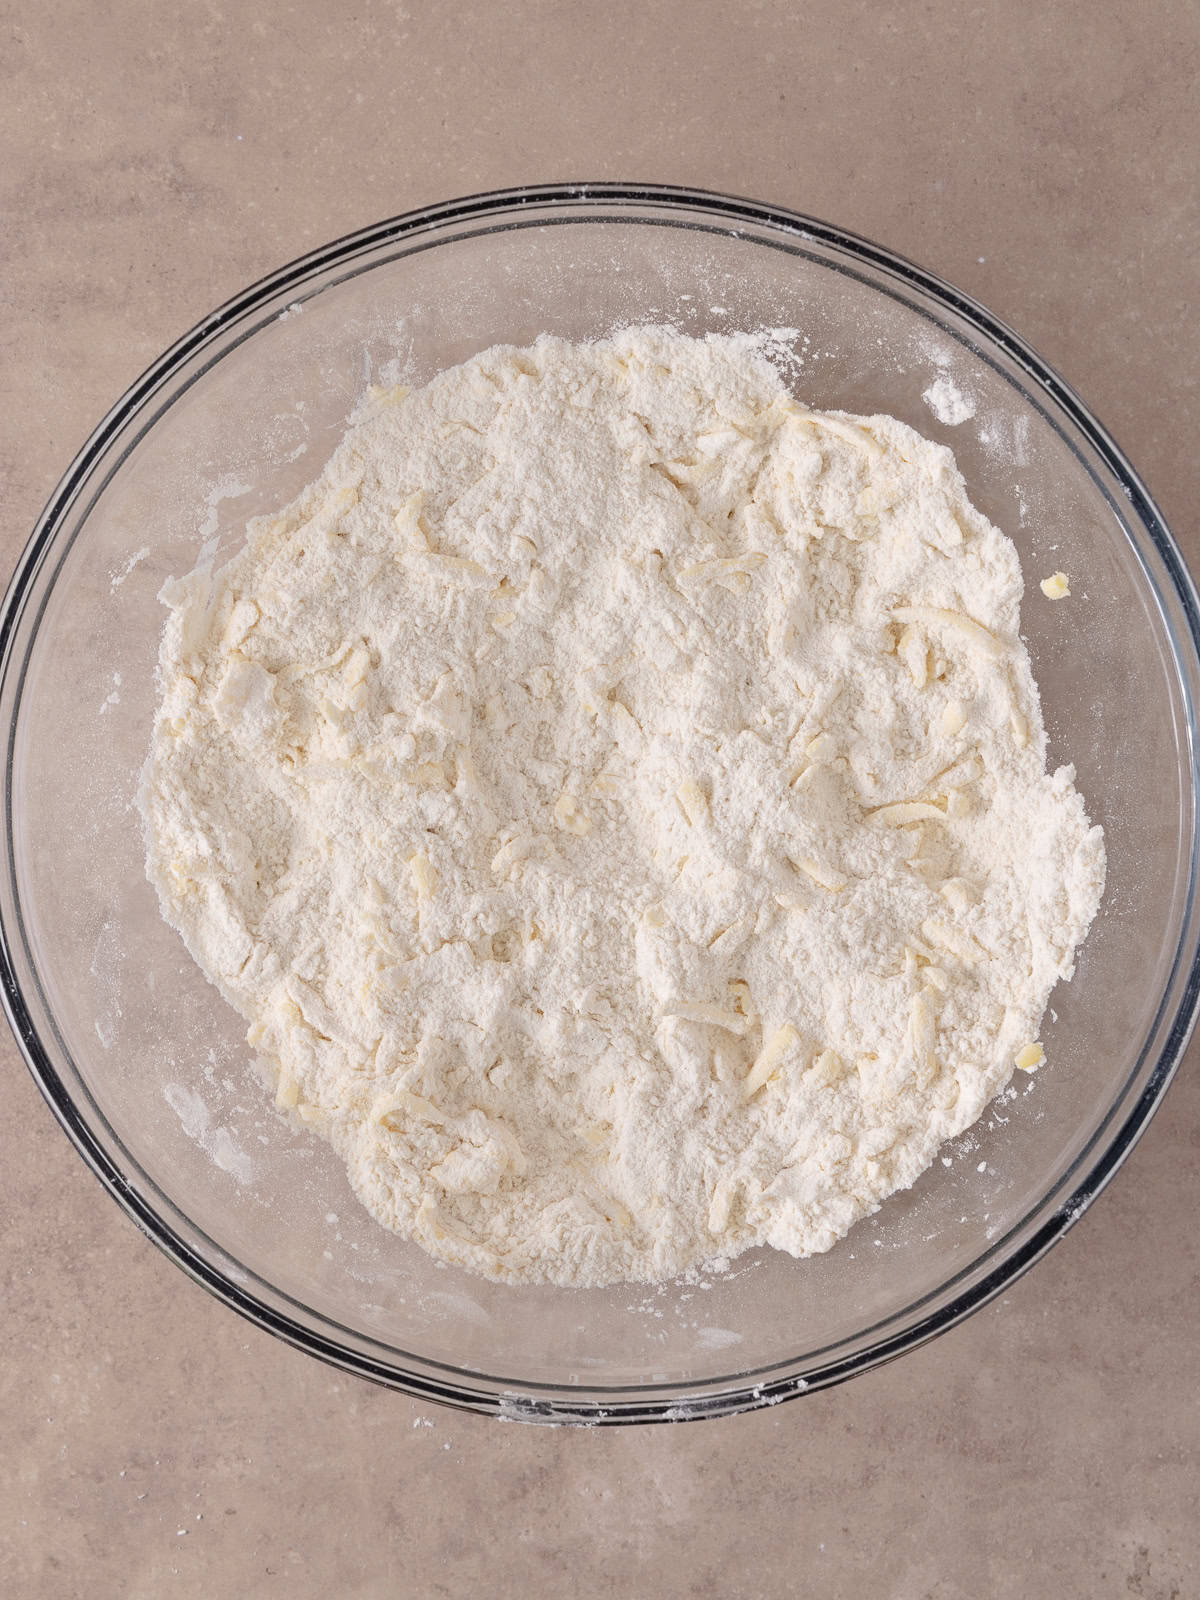 Shredded butter and flour mixture is combined.